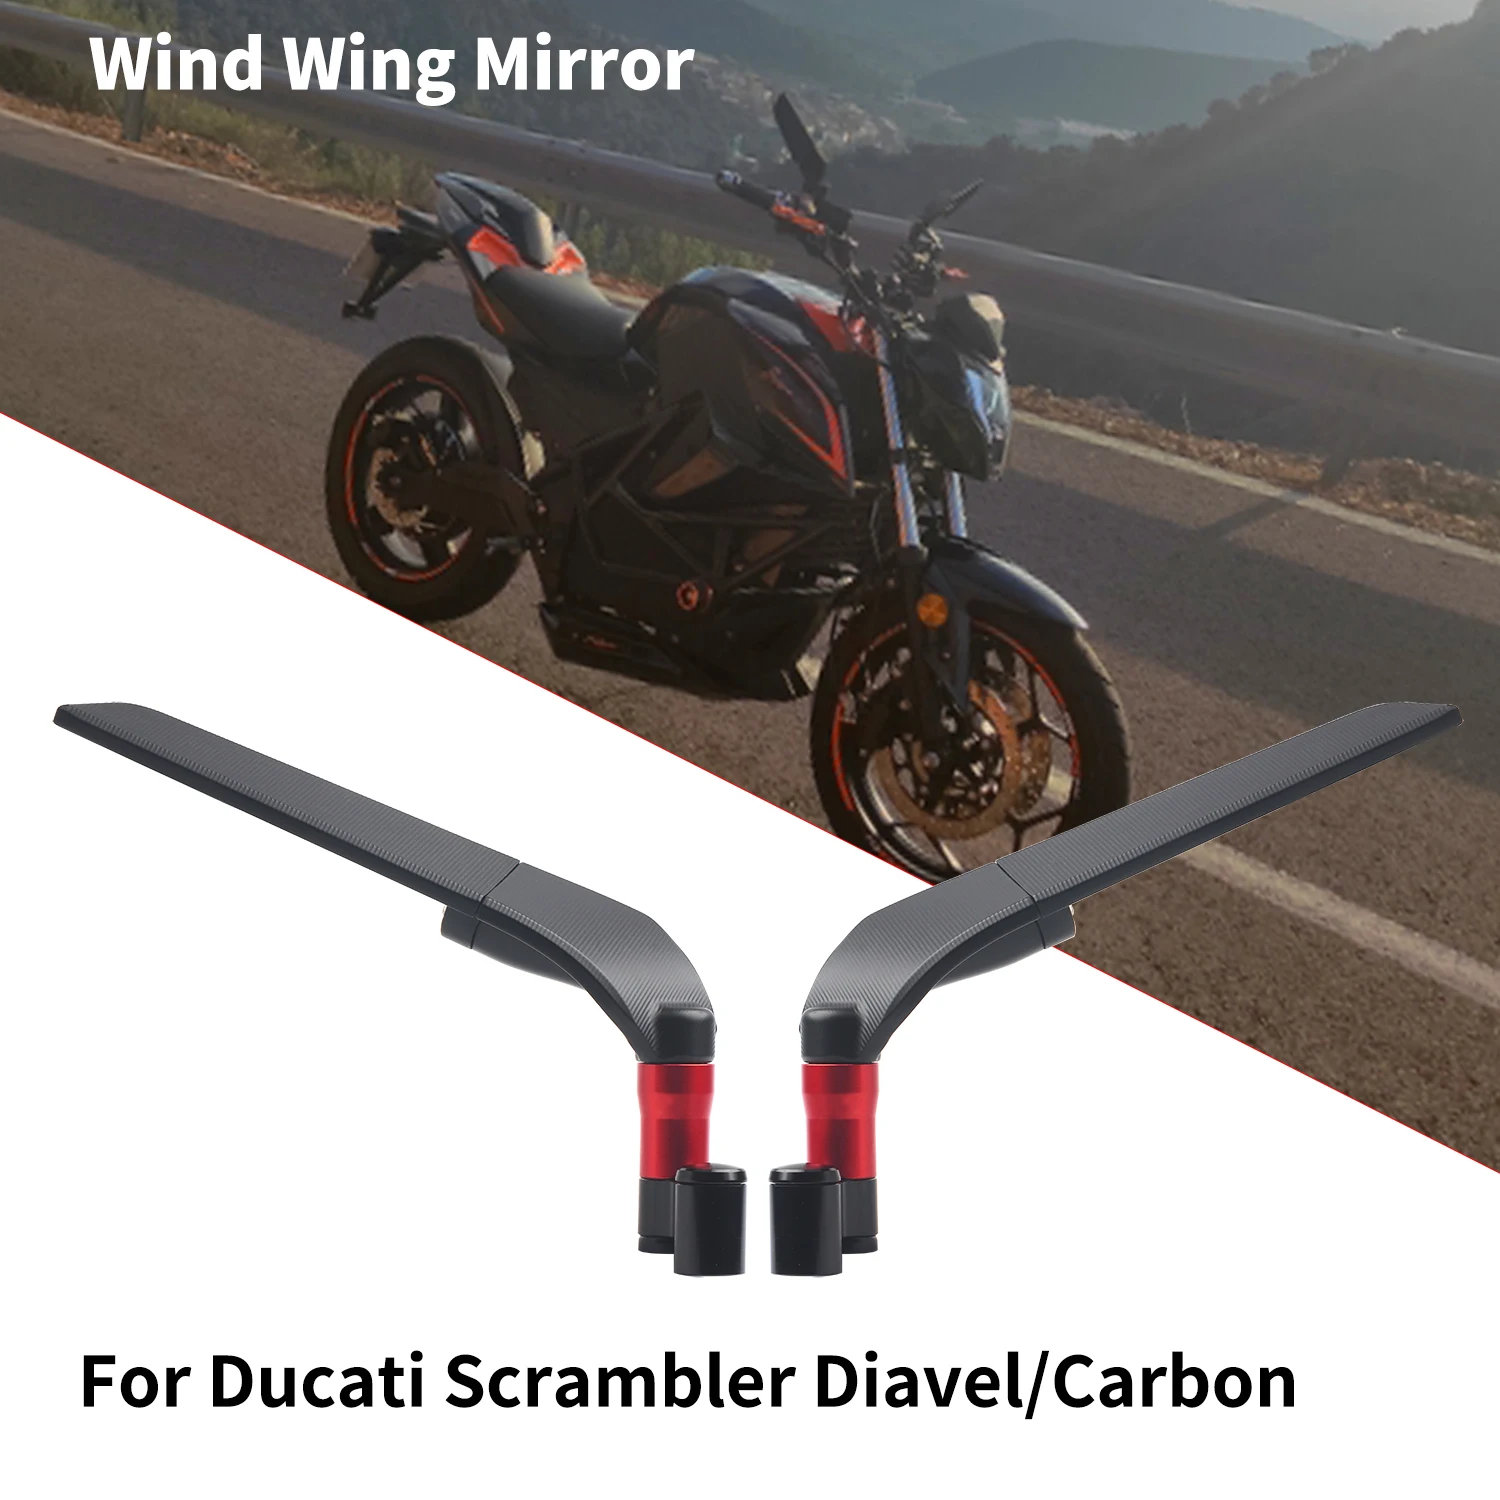 

For Ducati Scrambler Diavel/Carbon/XDiavel/S MONSTER Universal Motorcycle Mirror Wind Wing side Rearview Reversing mirror